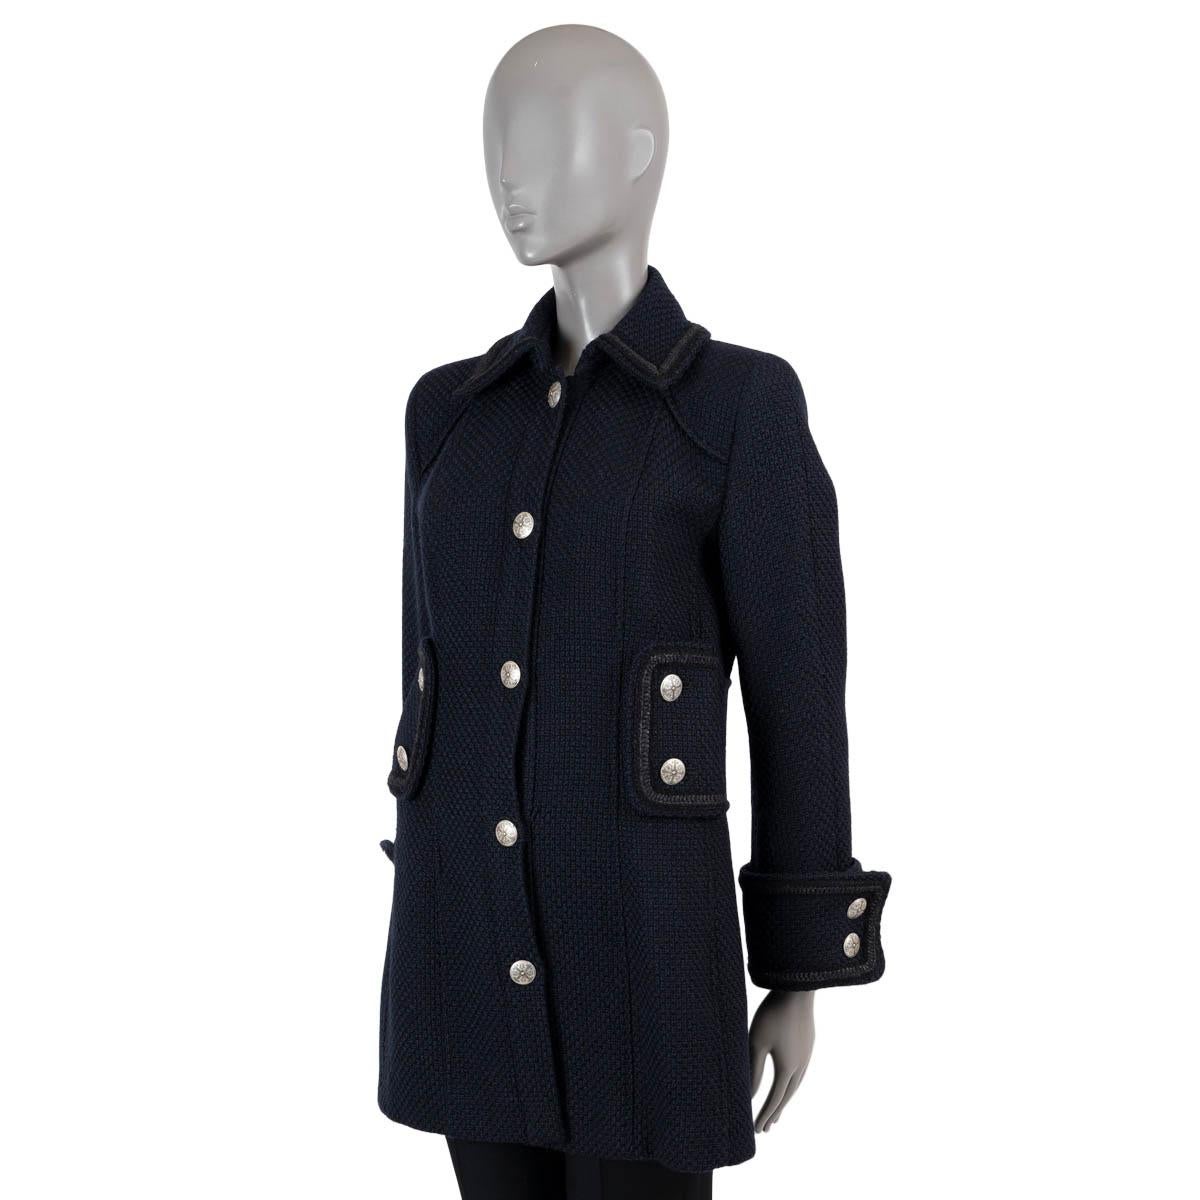 100% authentic Chanel tweed peacoat in navy blue wool (100%). Features a braided trim, wide waist belt and cuff straps. Closes with gold-tone buttons on the front and is lined in silk (100%). Has been worn and is in excellent